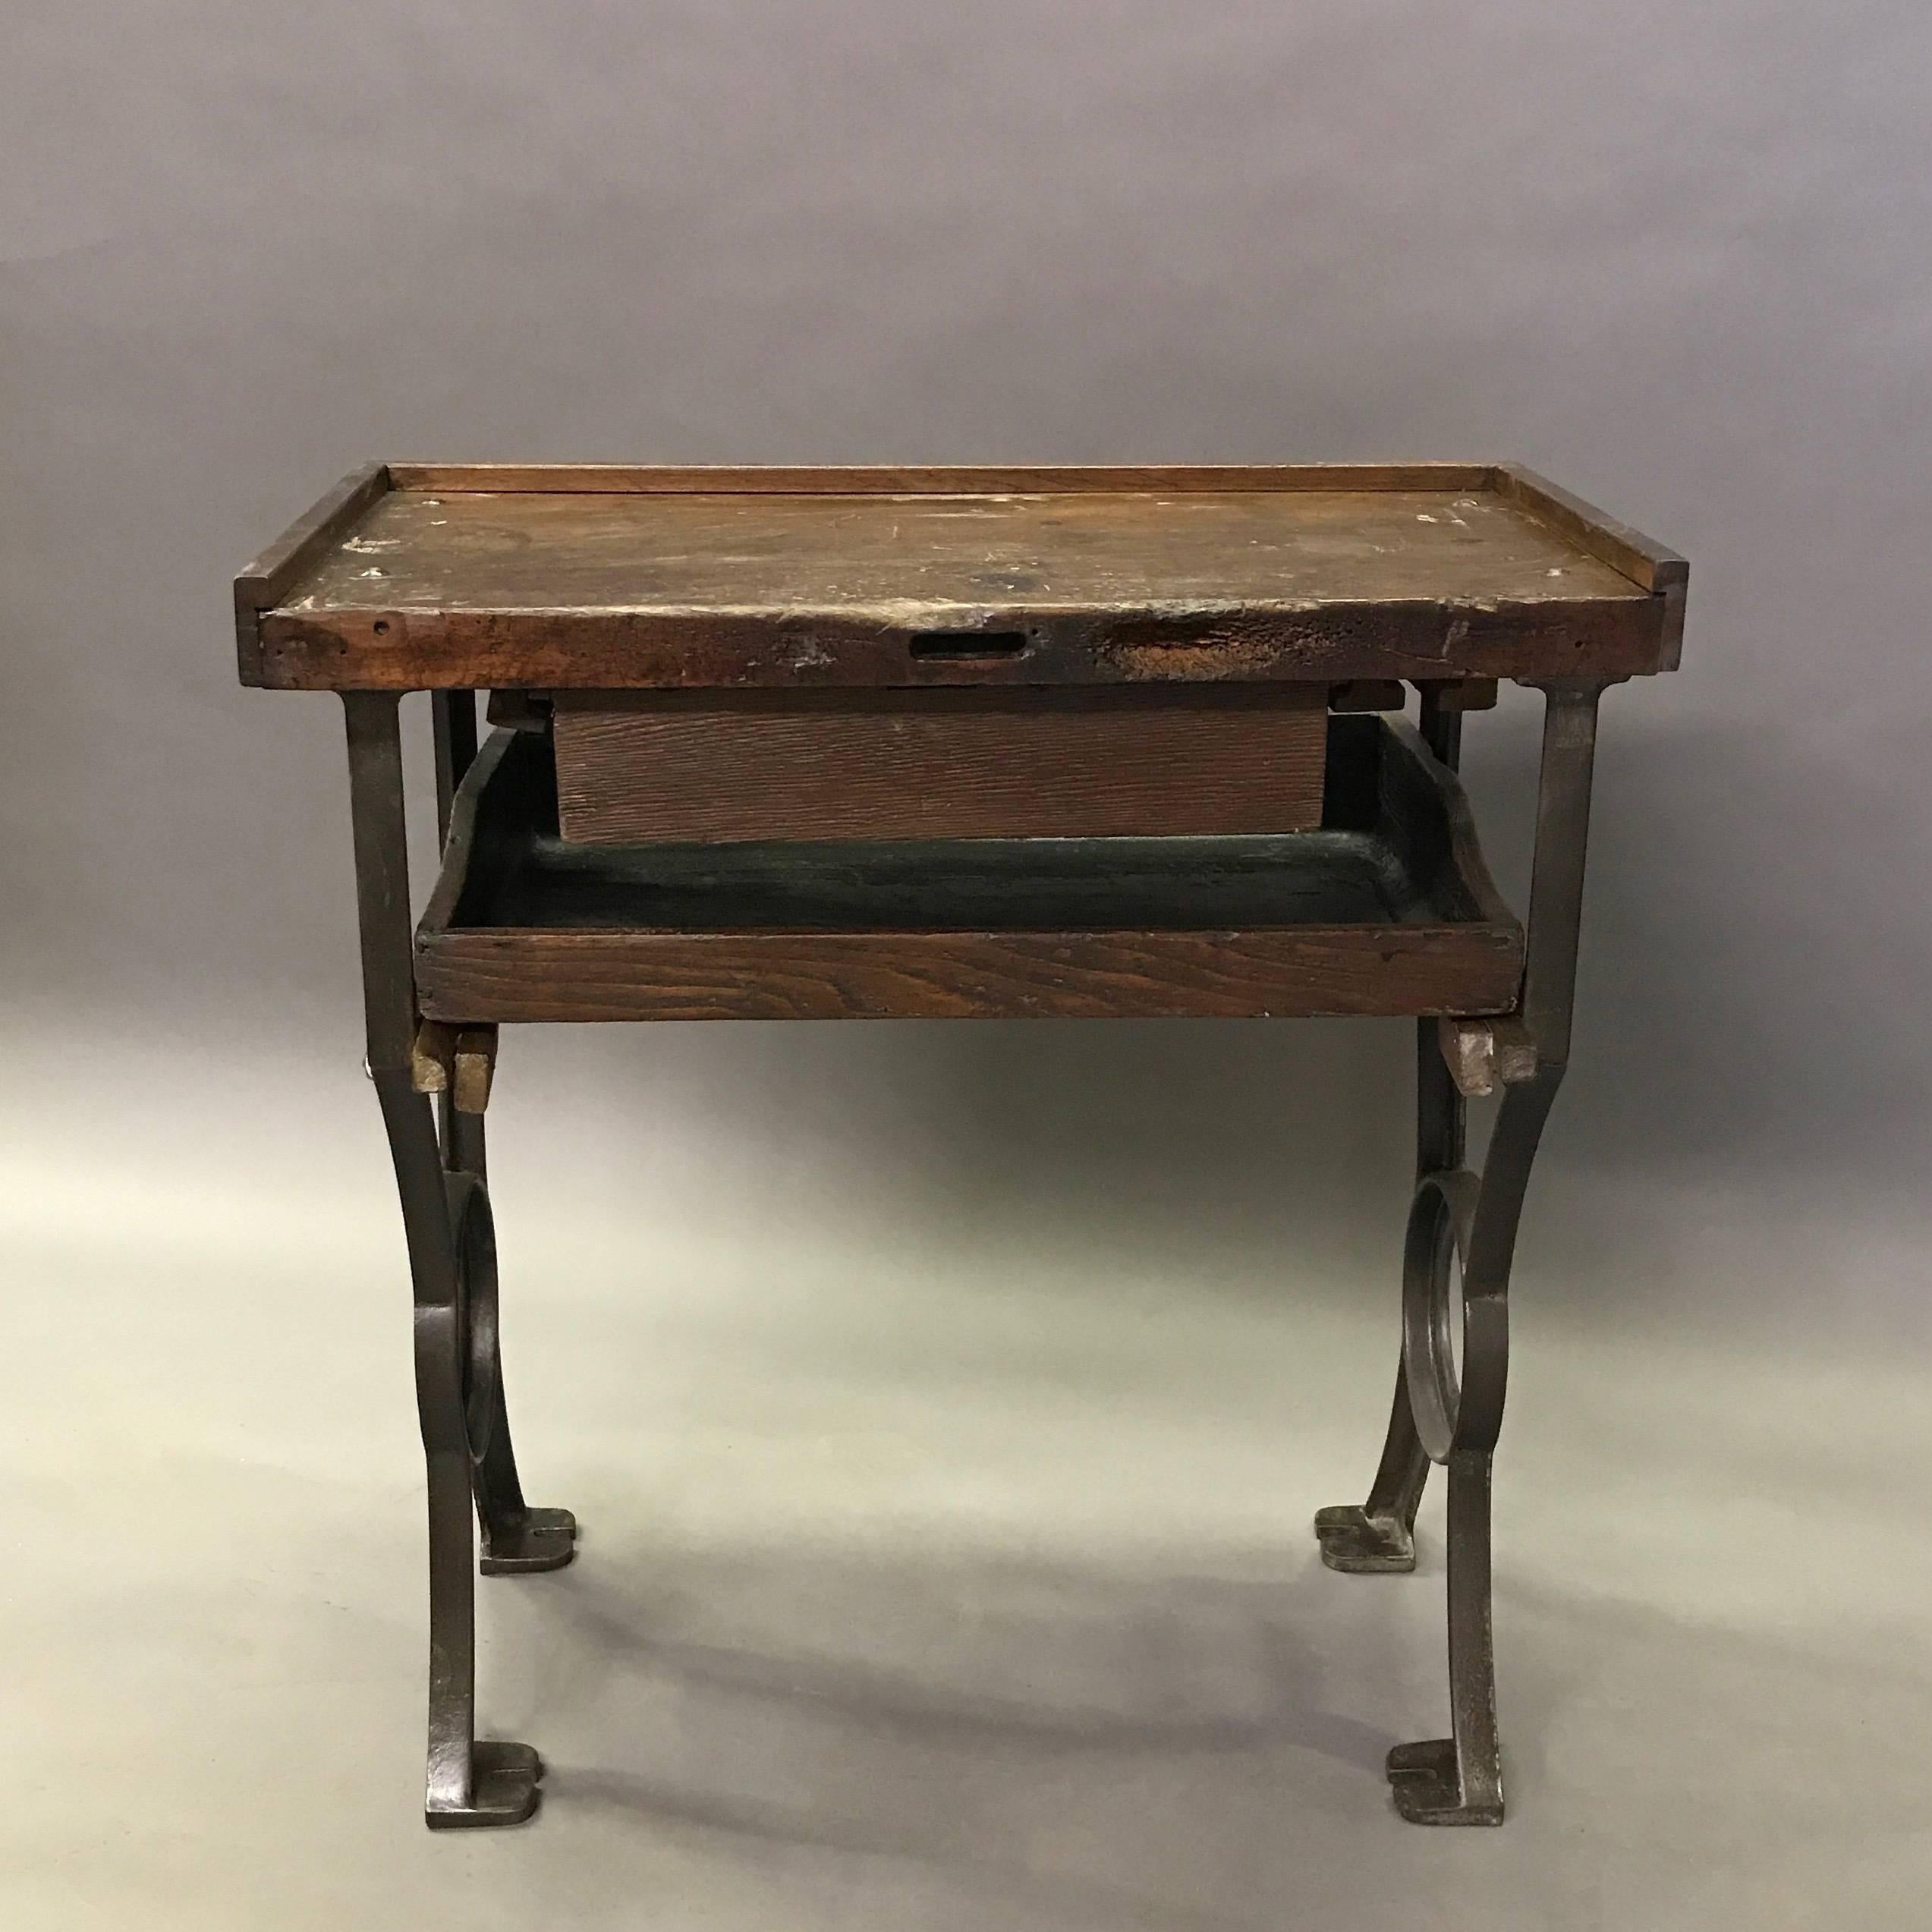 Vintage, 1930s, Industrial, jeweler's bench or table features a beautifully rustic, work worn maple top stained to a walnut finish with two pull-out drawers in a cast iron frame. A double and triple bench are also available.